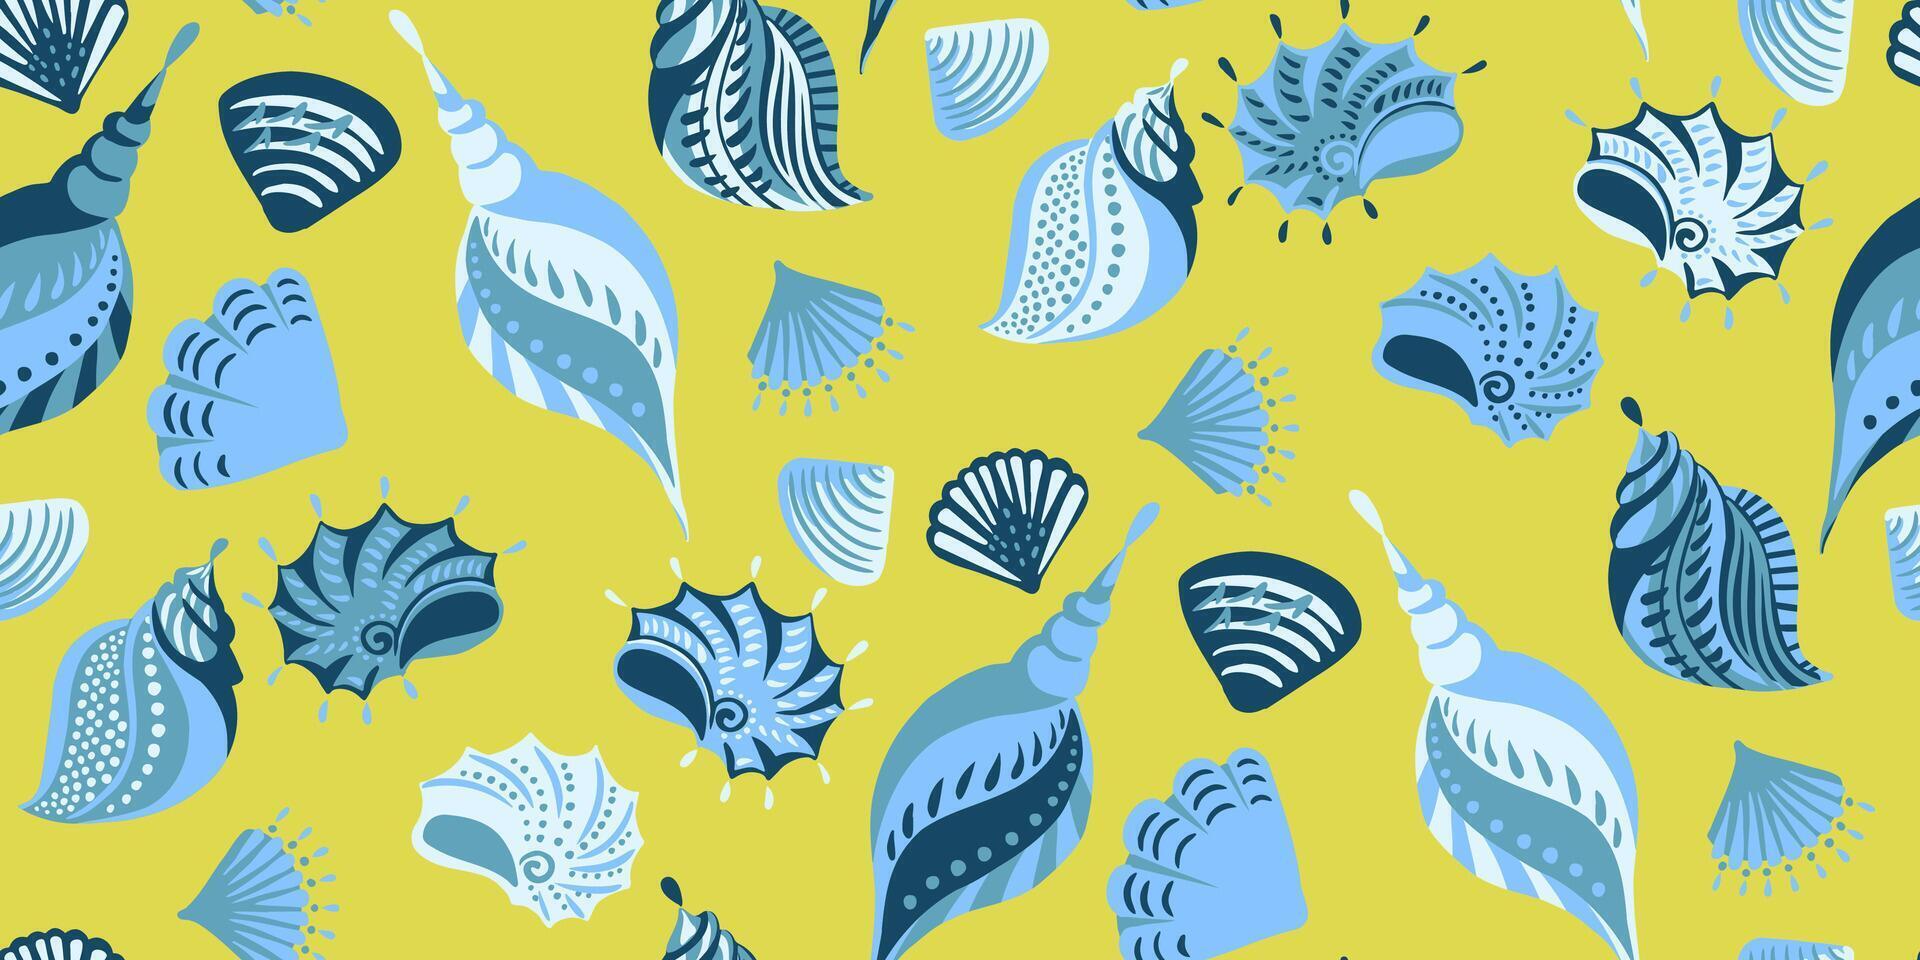 Tropical summer abstract artistic ocean sea shells seamless pattern. Vector hand drawn sketch. Colorful cute blue shells on a green background.Template for designs, notebook cover, wrapping paper